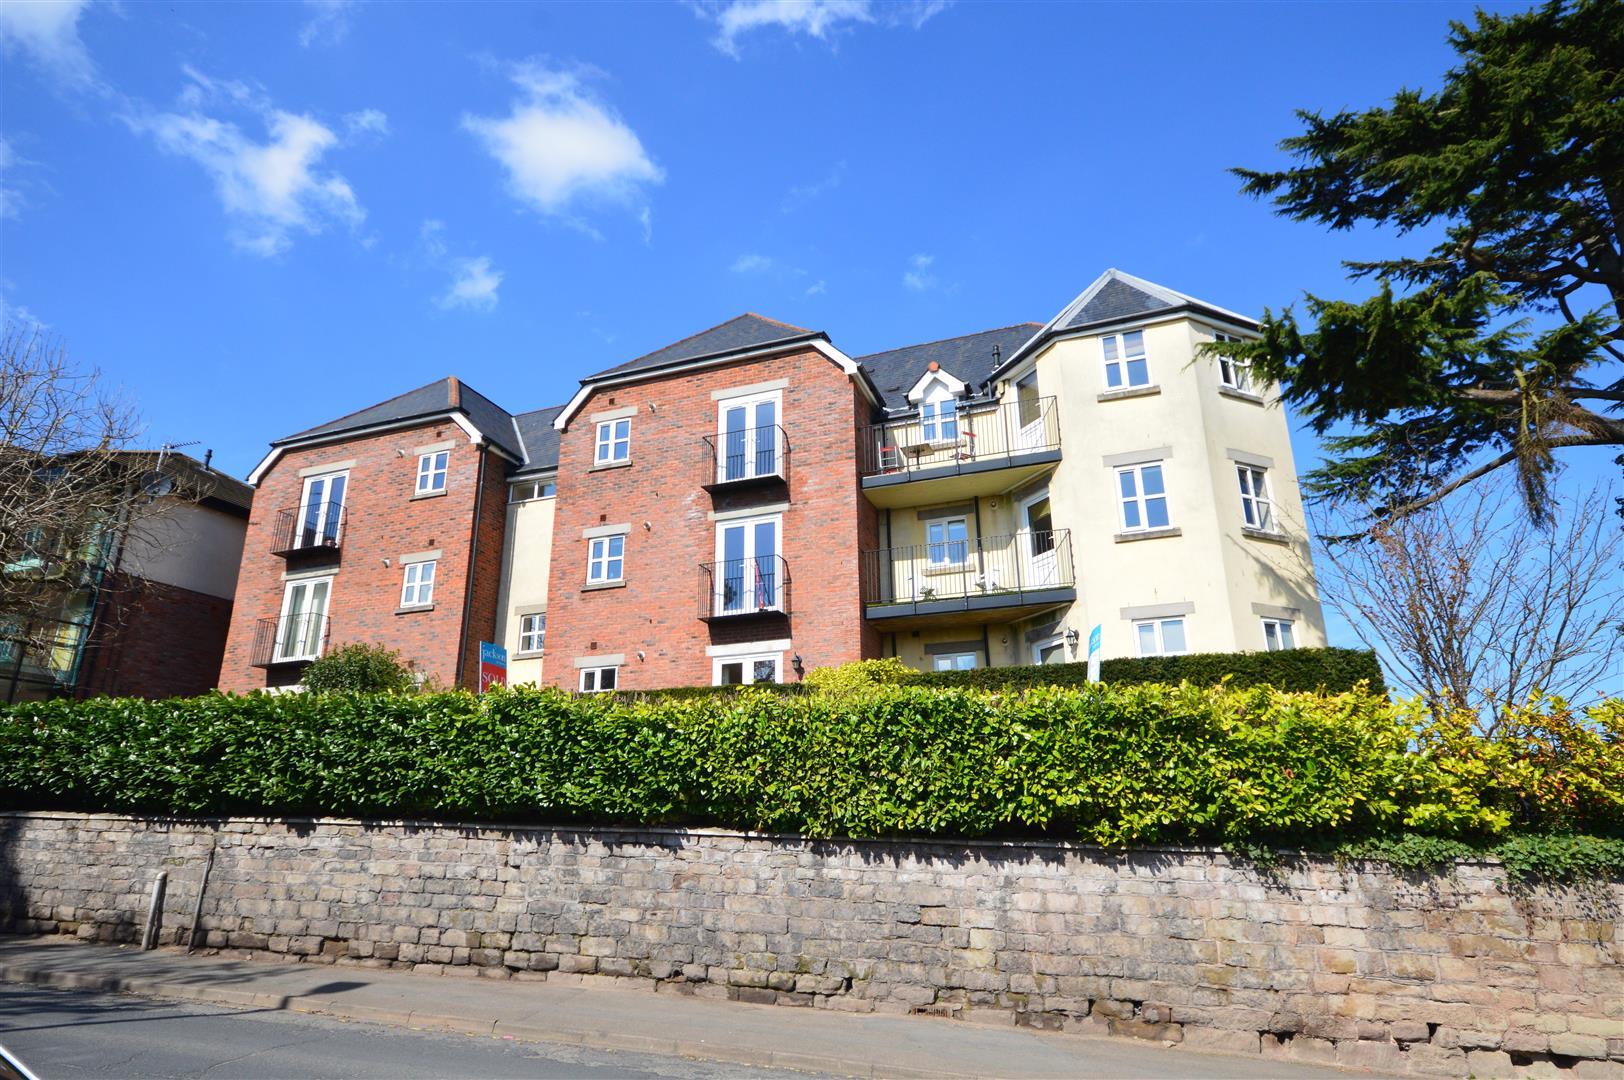 2 bed flat for sale in Folly Lane, HR1